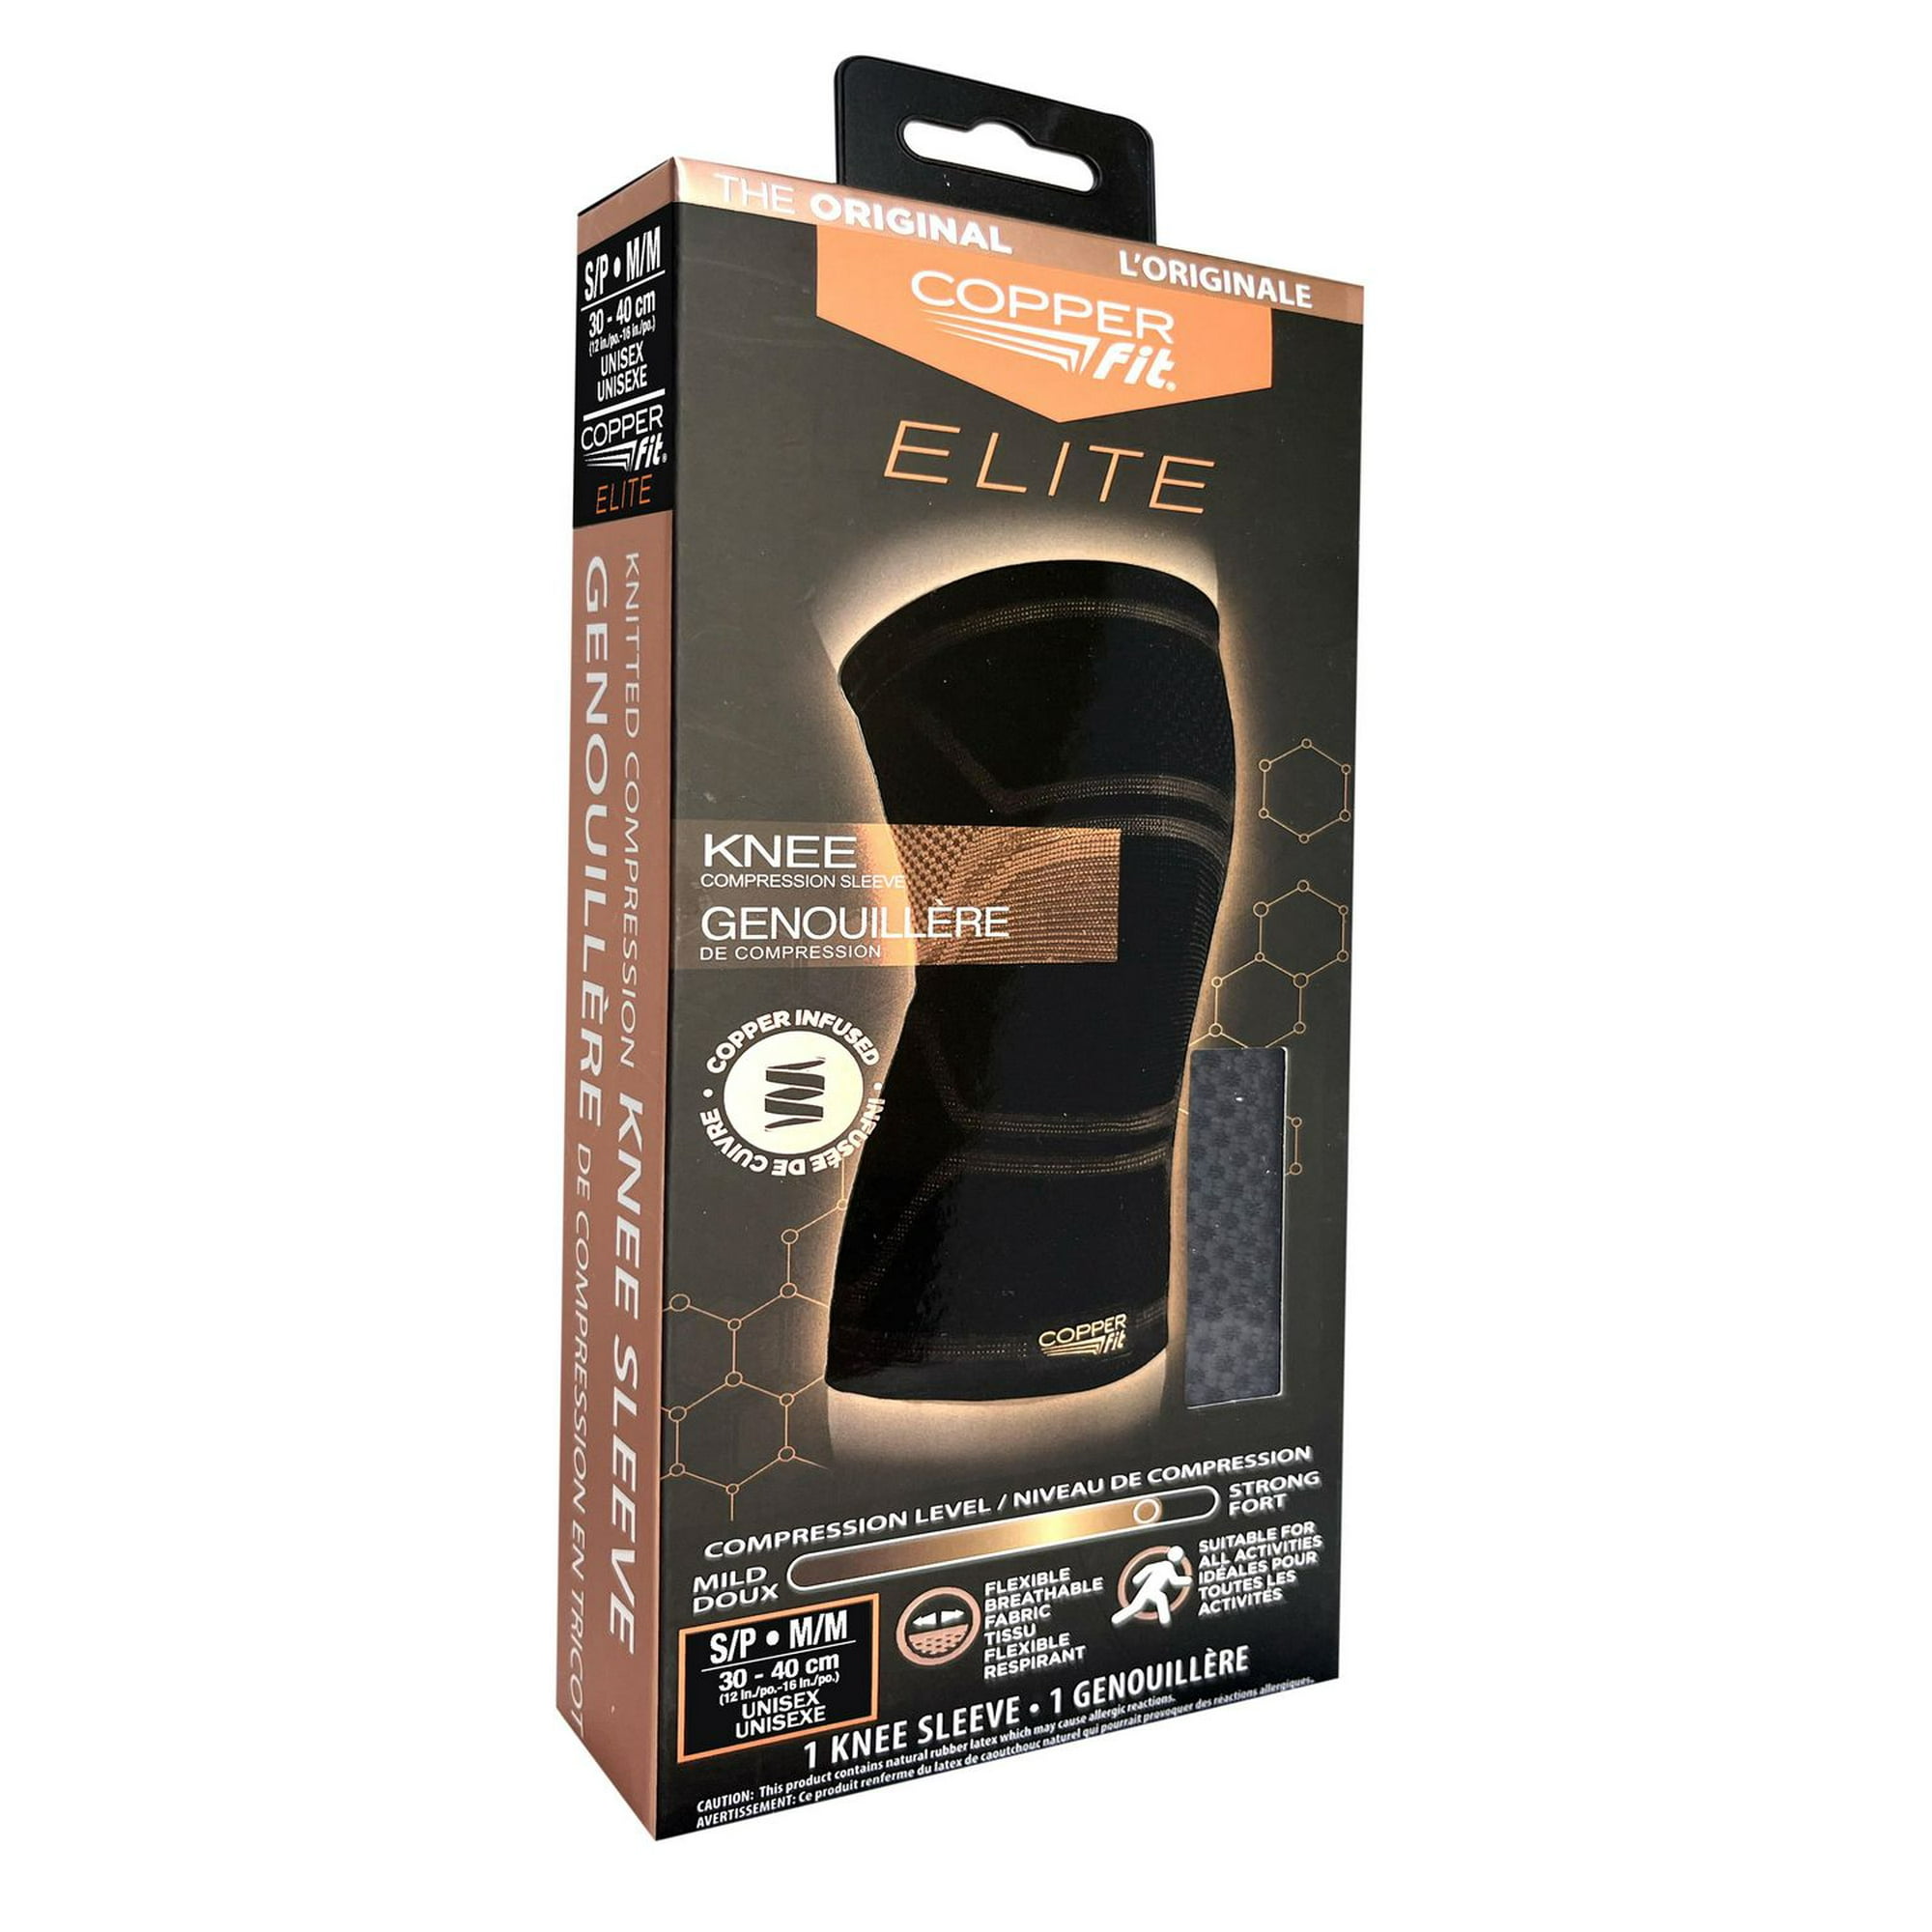 As Seen On TV Copper Fit Pro Back Support - Shop Sleeves & Braces at H-E-B